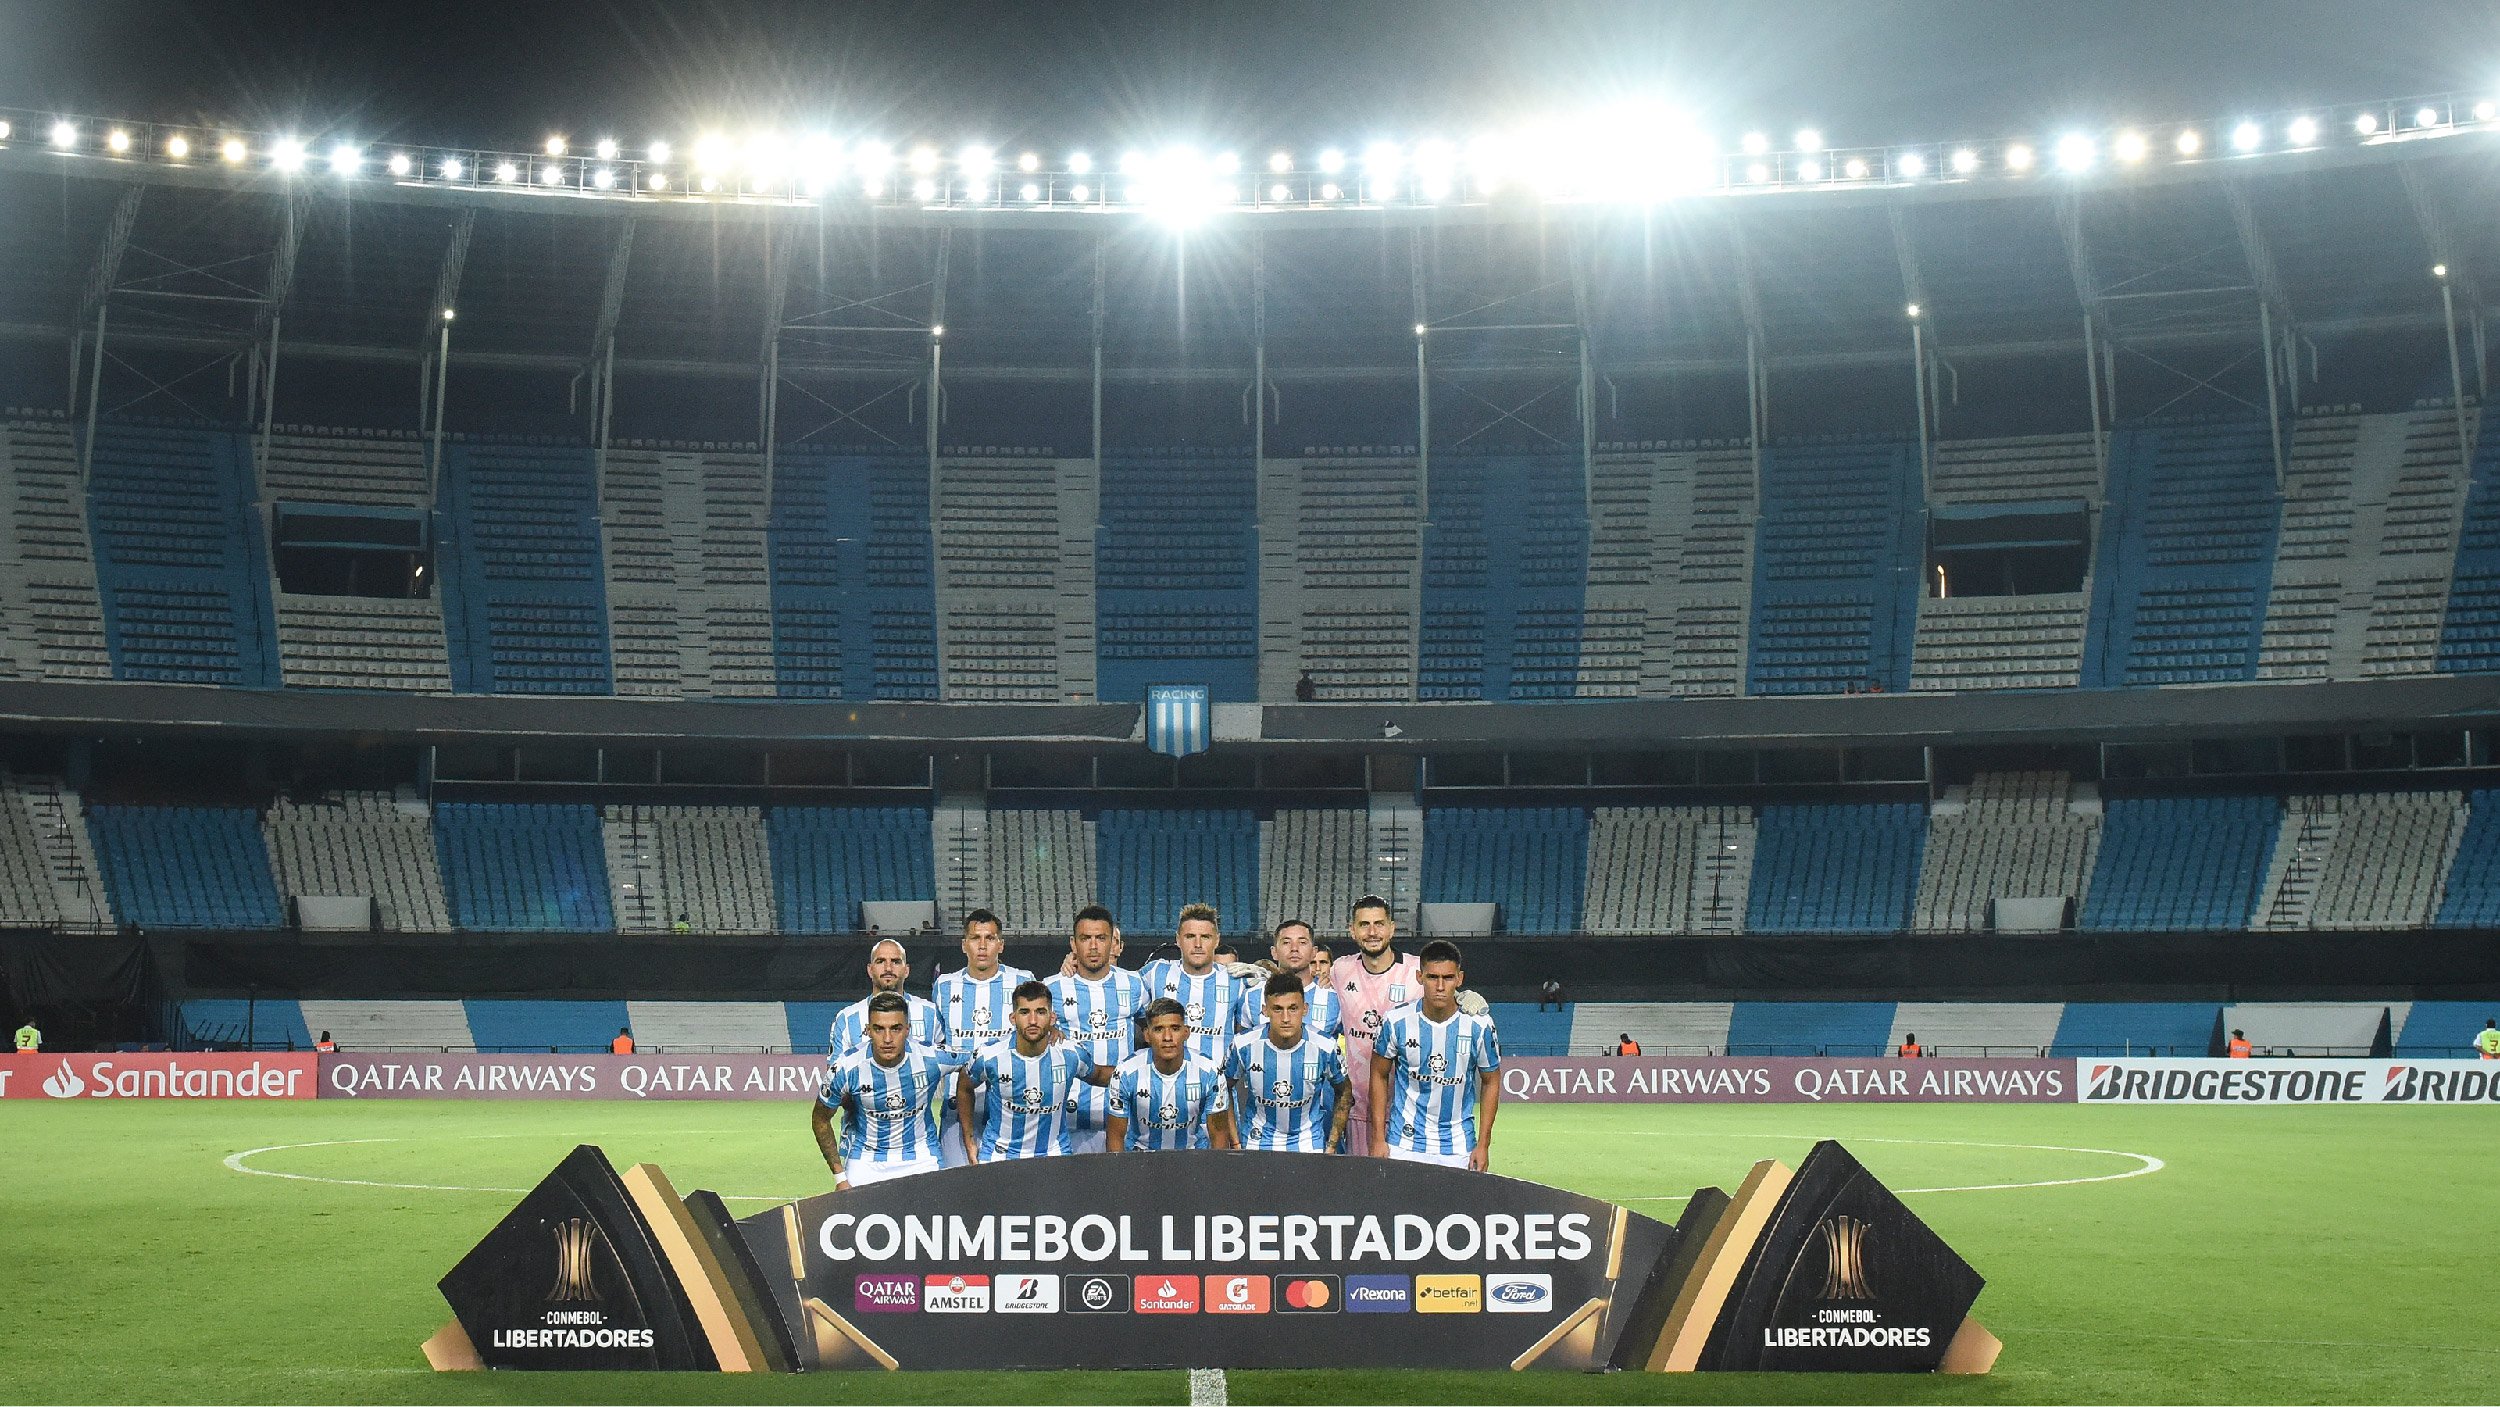 AVELLANEDA, ARGENTINA - MARCH 12: Players of Racing Club pose for the team photo prior to a Group F match between Racing Club and Alianza Lima as part of Copa CONMEBOL Libertadores 2020 at Juan Domingo Peron Stadium on March 12, 2020 in Avellaneda, Argentina. The match is played behind closed doors to prevent the spread of the novel Coronavirus (COVID-19). (Photo by Marcelo Endelli/Getty Images)